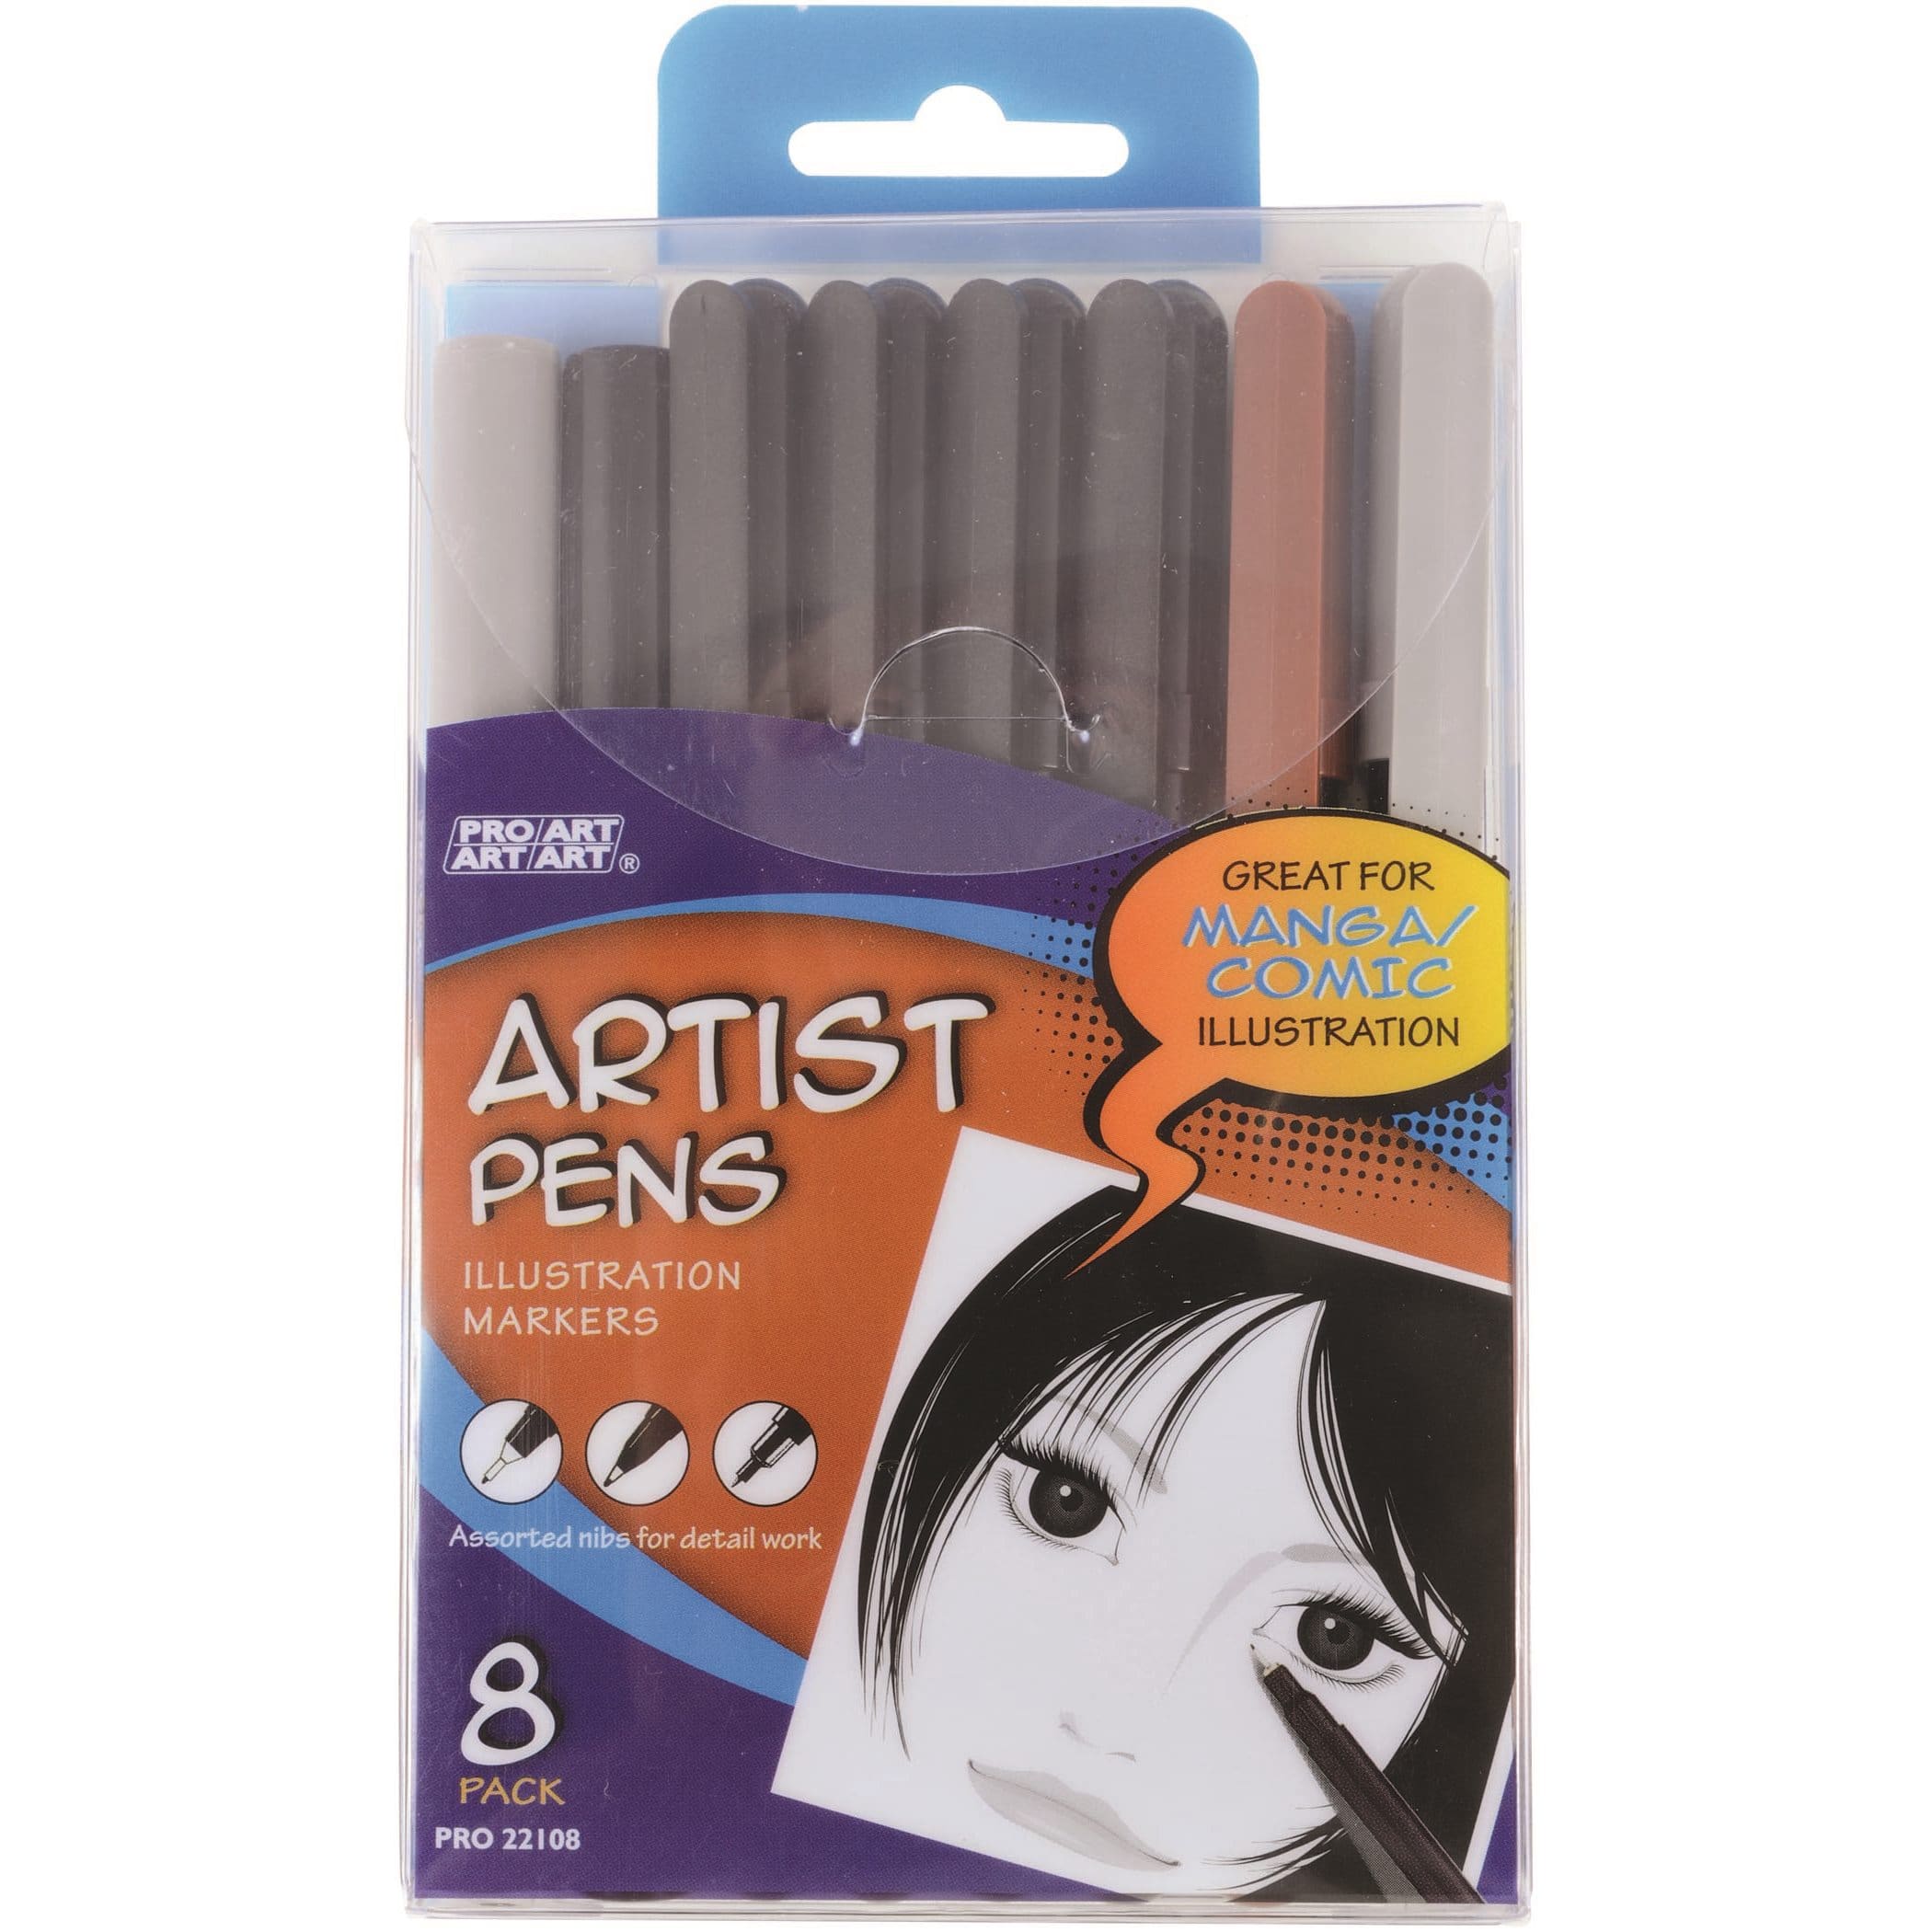 The Best Set of Black Disposable Drawing Pens for Artists and